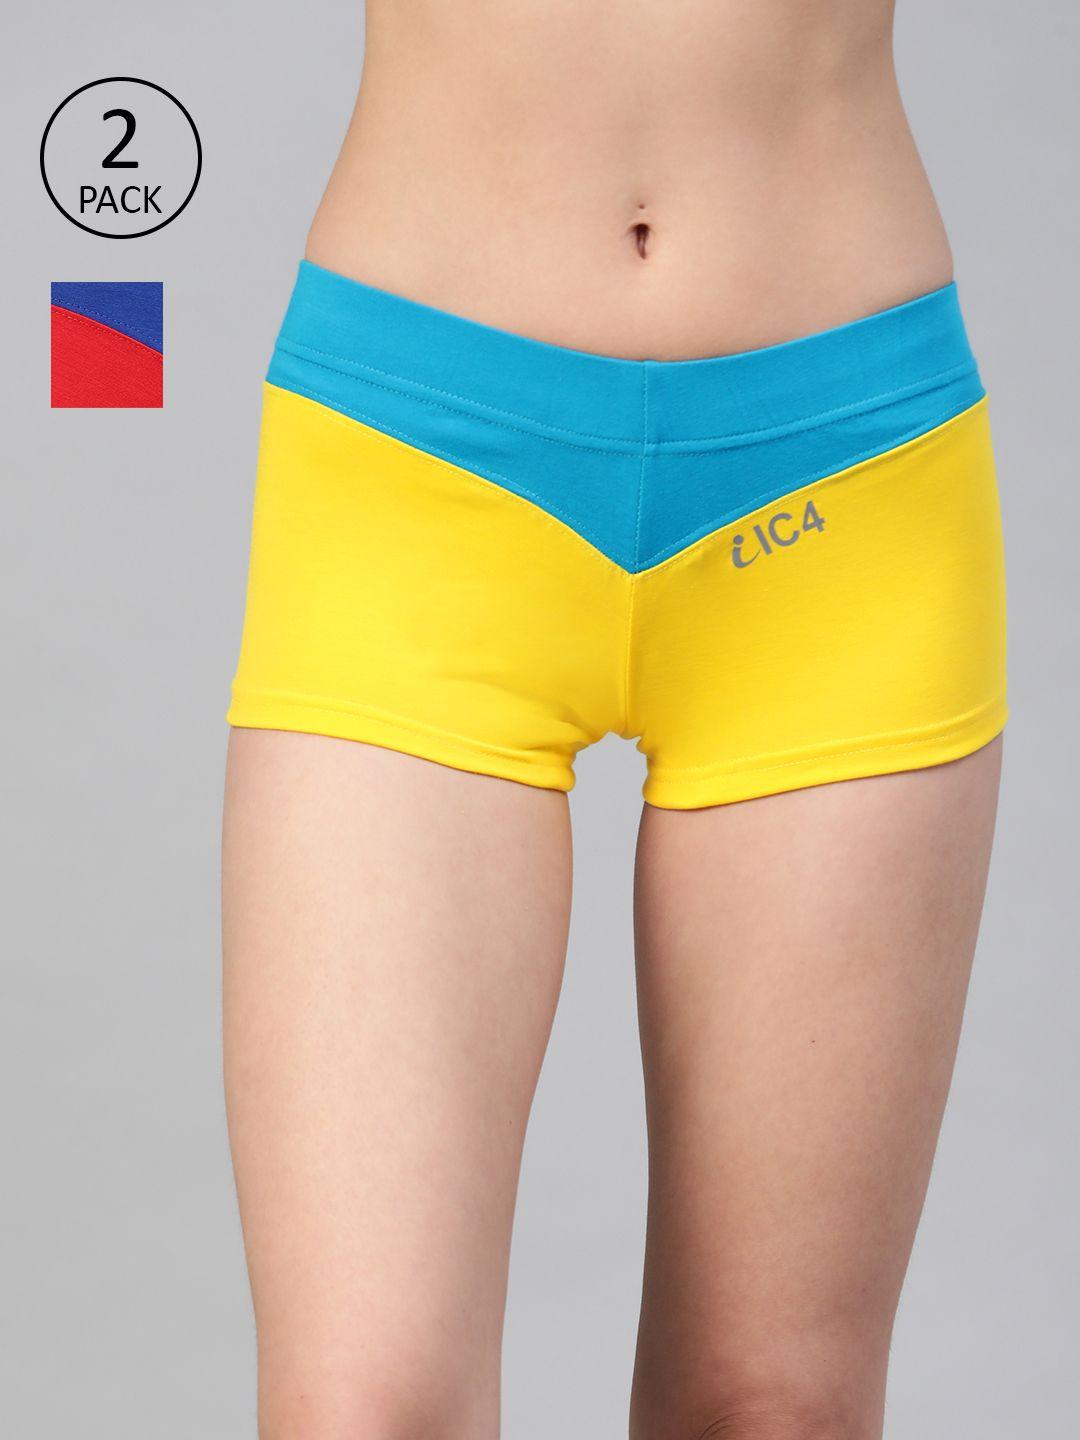 ic4 women pack of 2 colourblocked boy shorts 0rbr-tby-1008p2